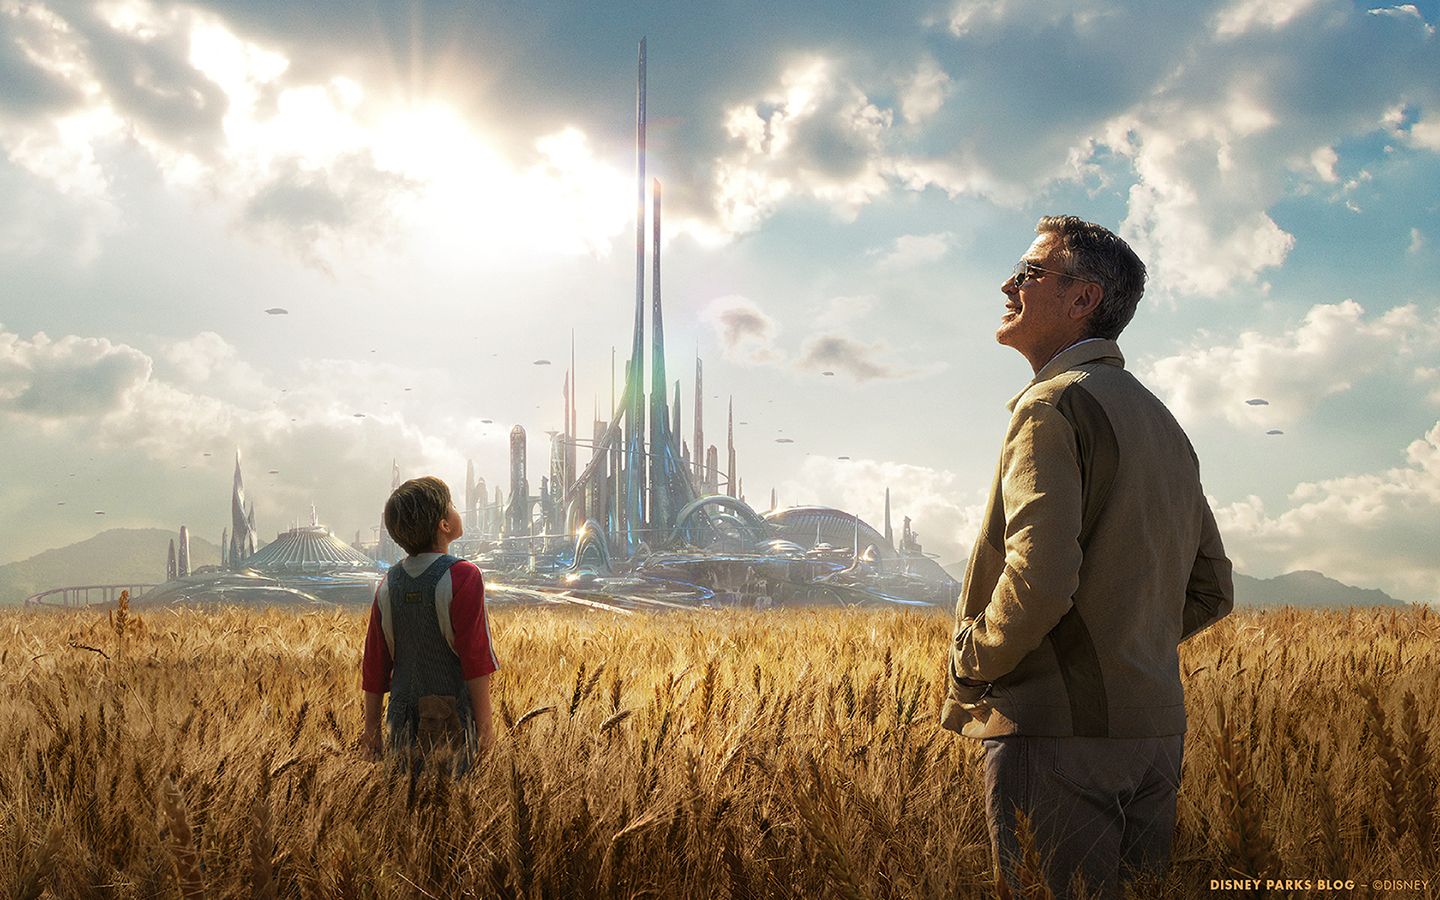 Tomorrowland Movie Wallpapers